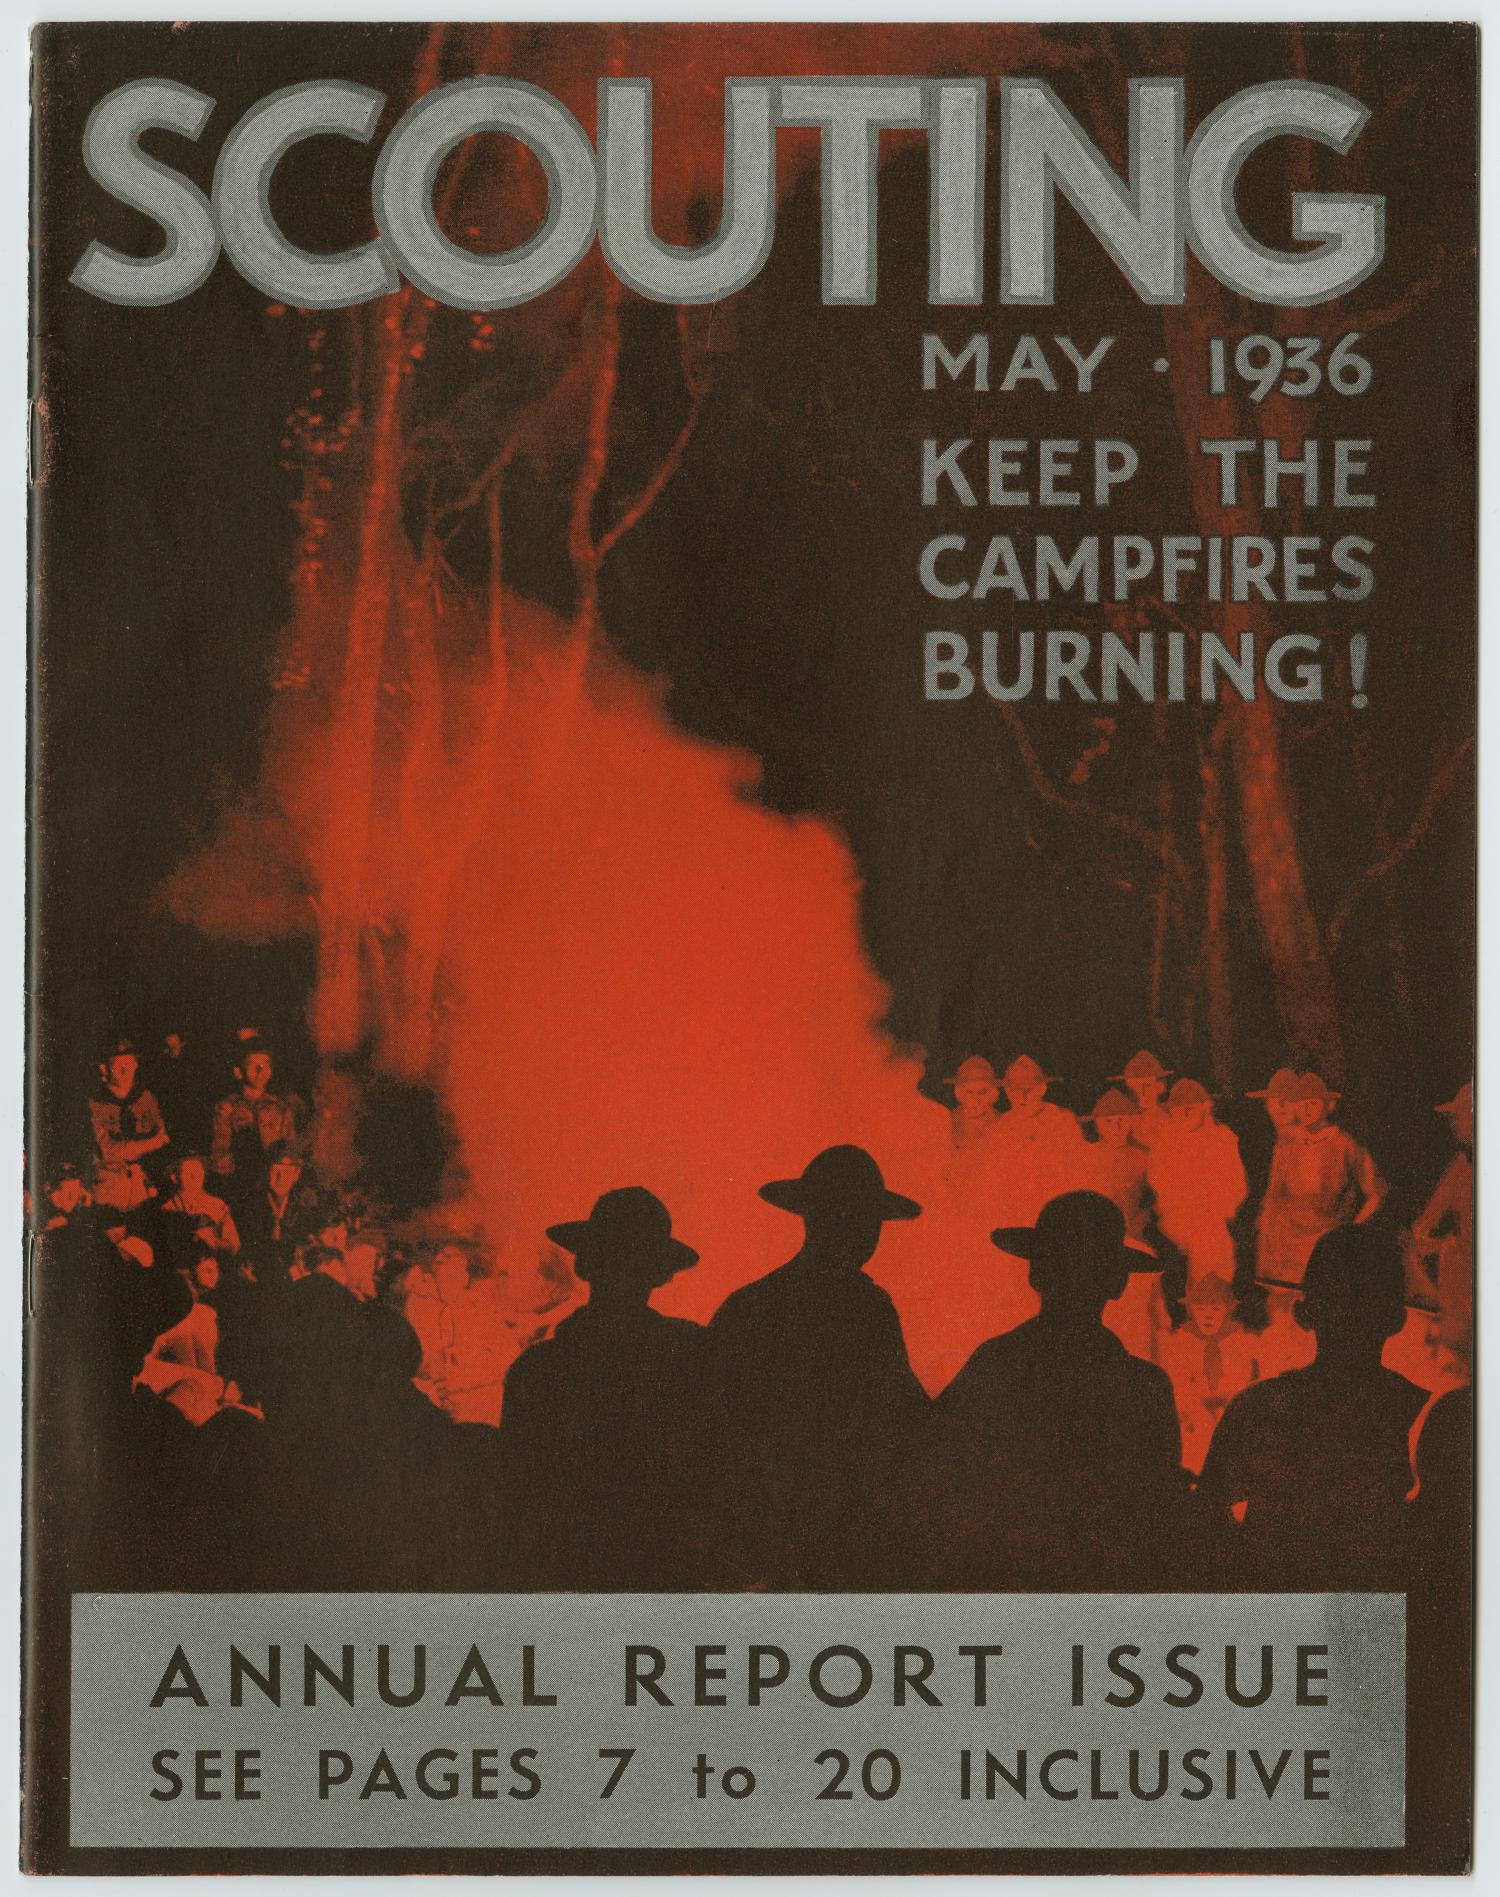 Scouting, Volume 24, Number 5, May 1936
                                                
                                                    1
                                                